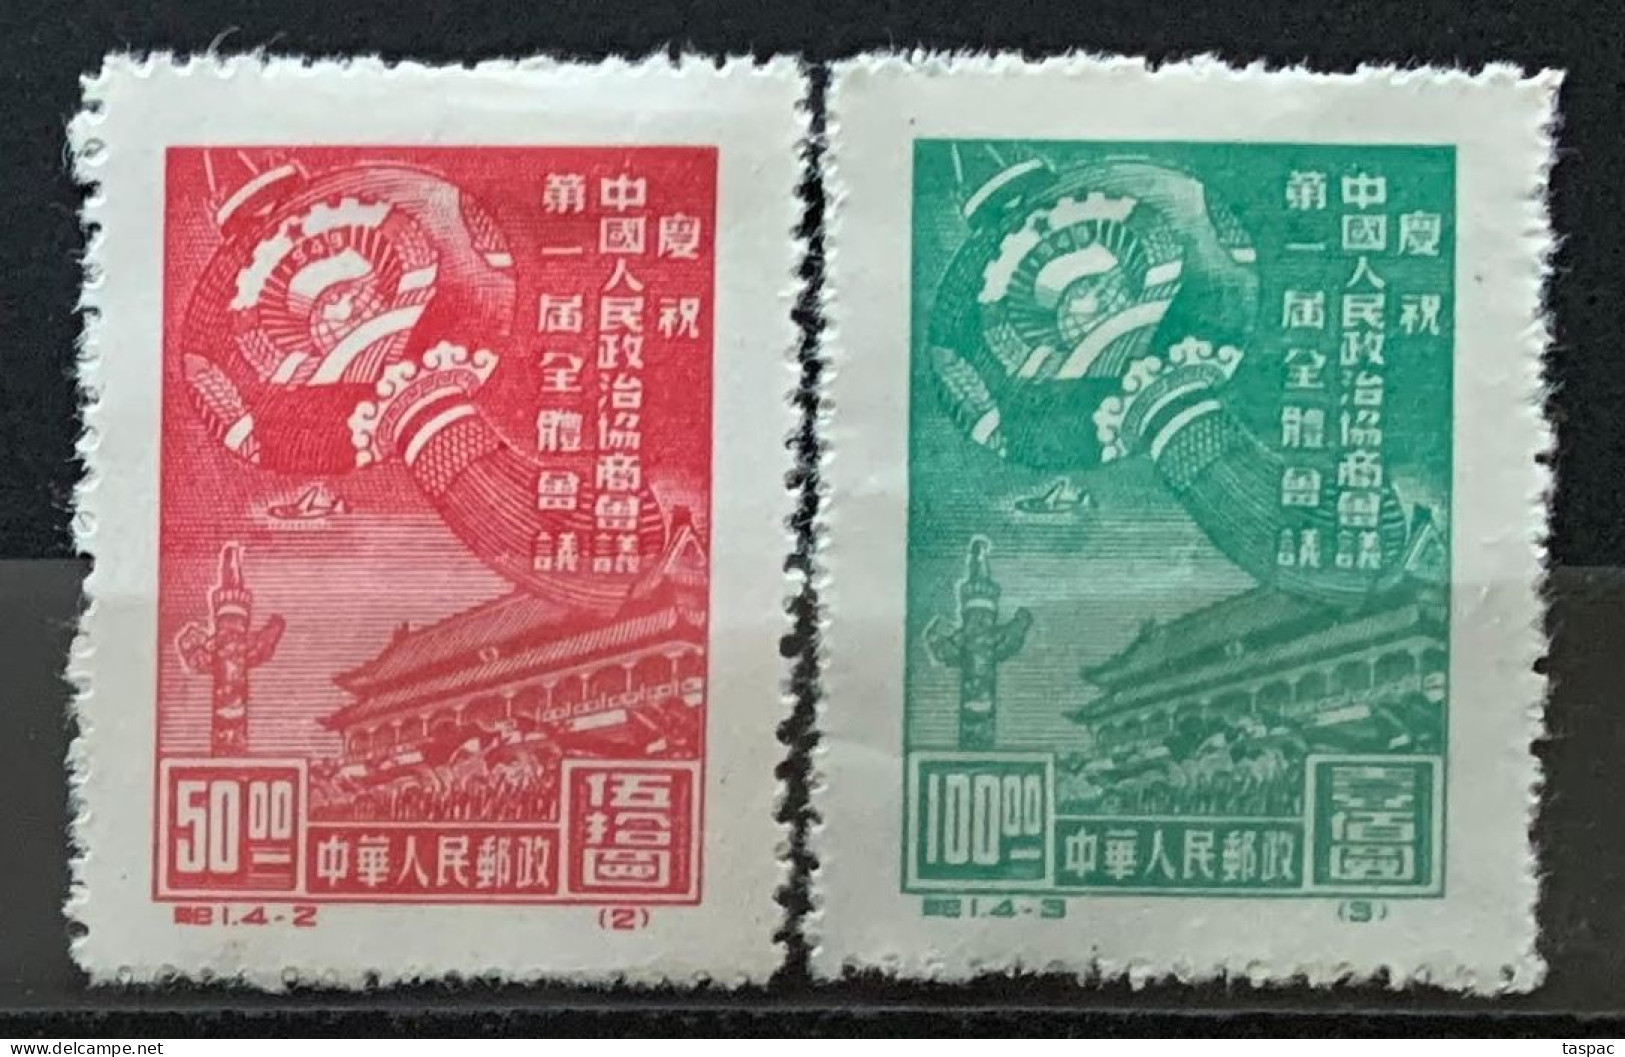 China P.R. 1949 Mi# 2-3 II (*) Mint No Gum, Hinged - Short Set - Reprints - Lantern And Gate Of Heavenly Peace - Official Reprints